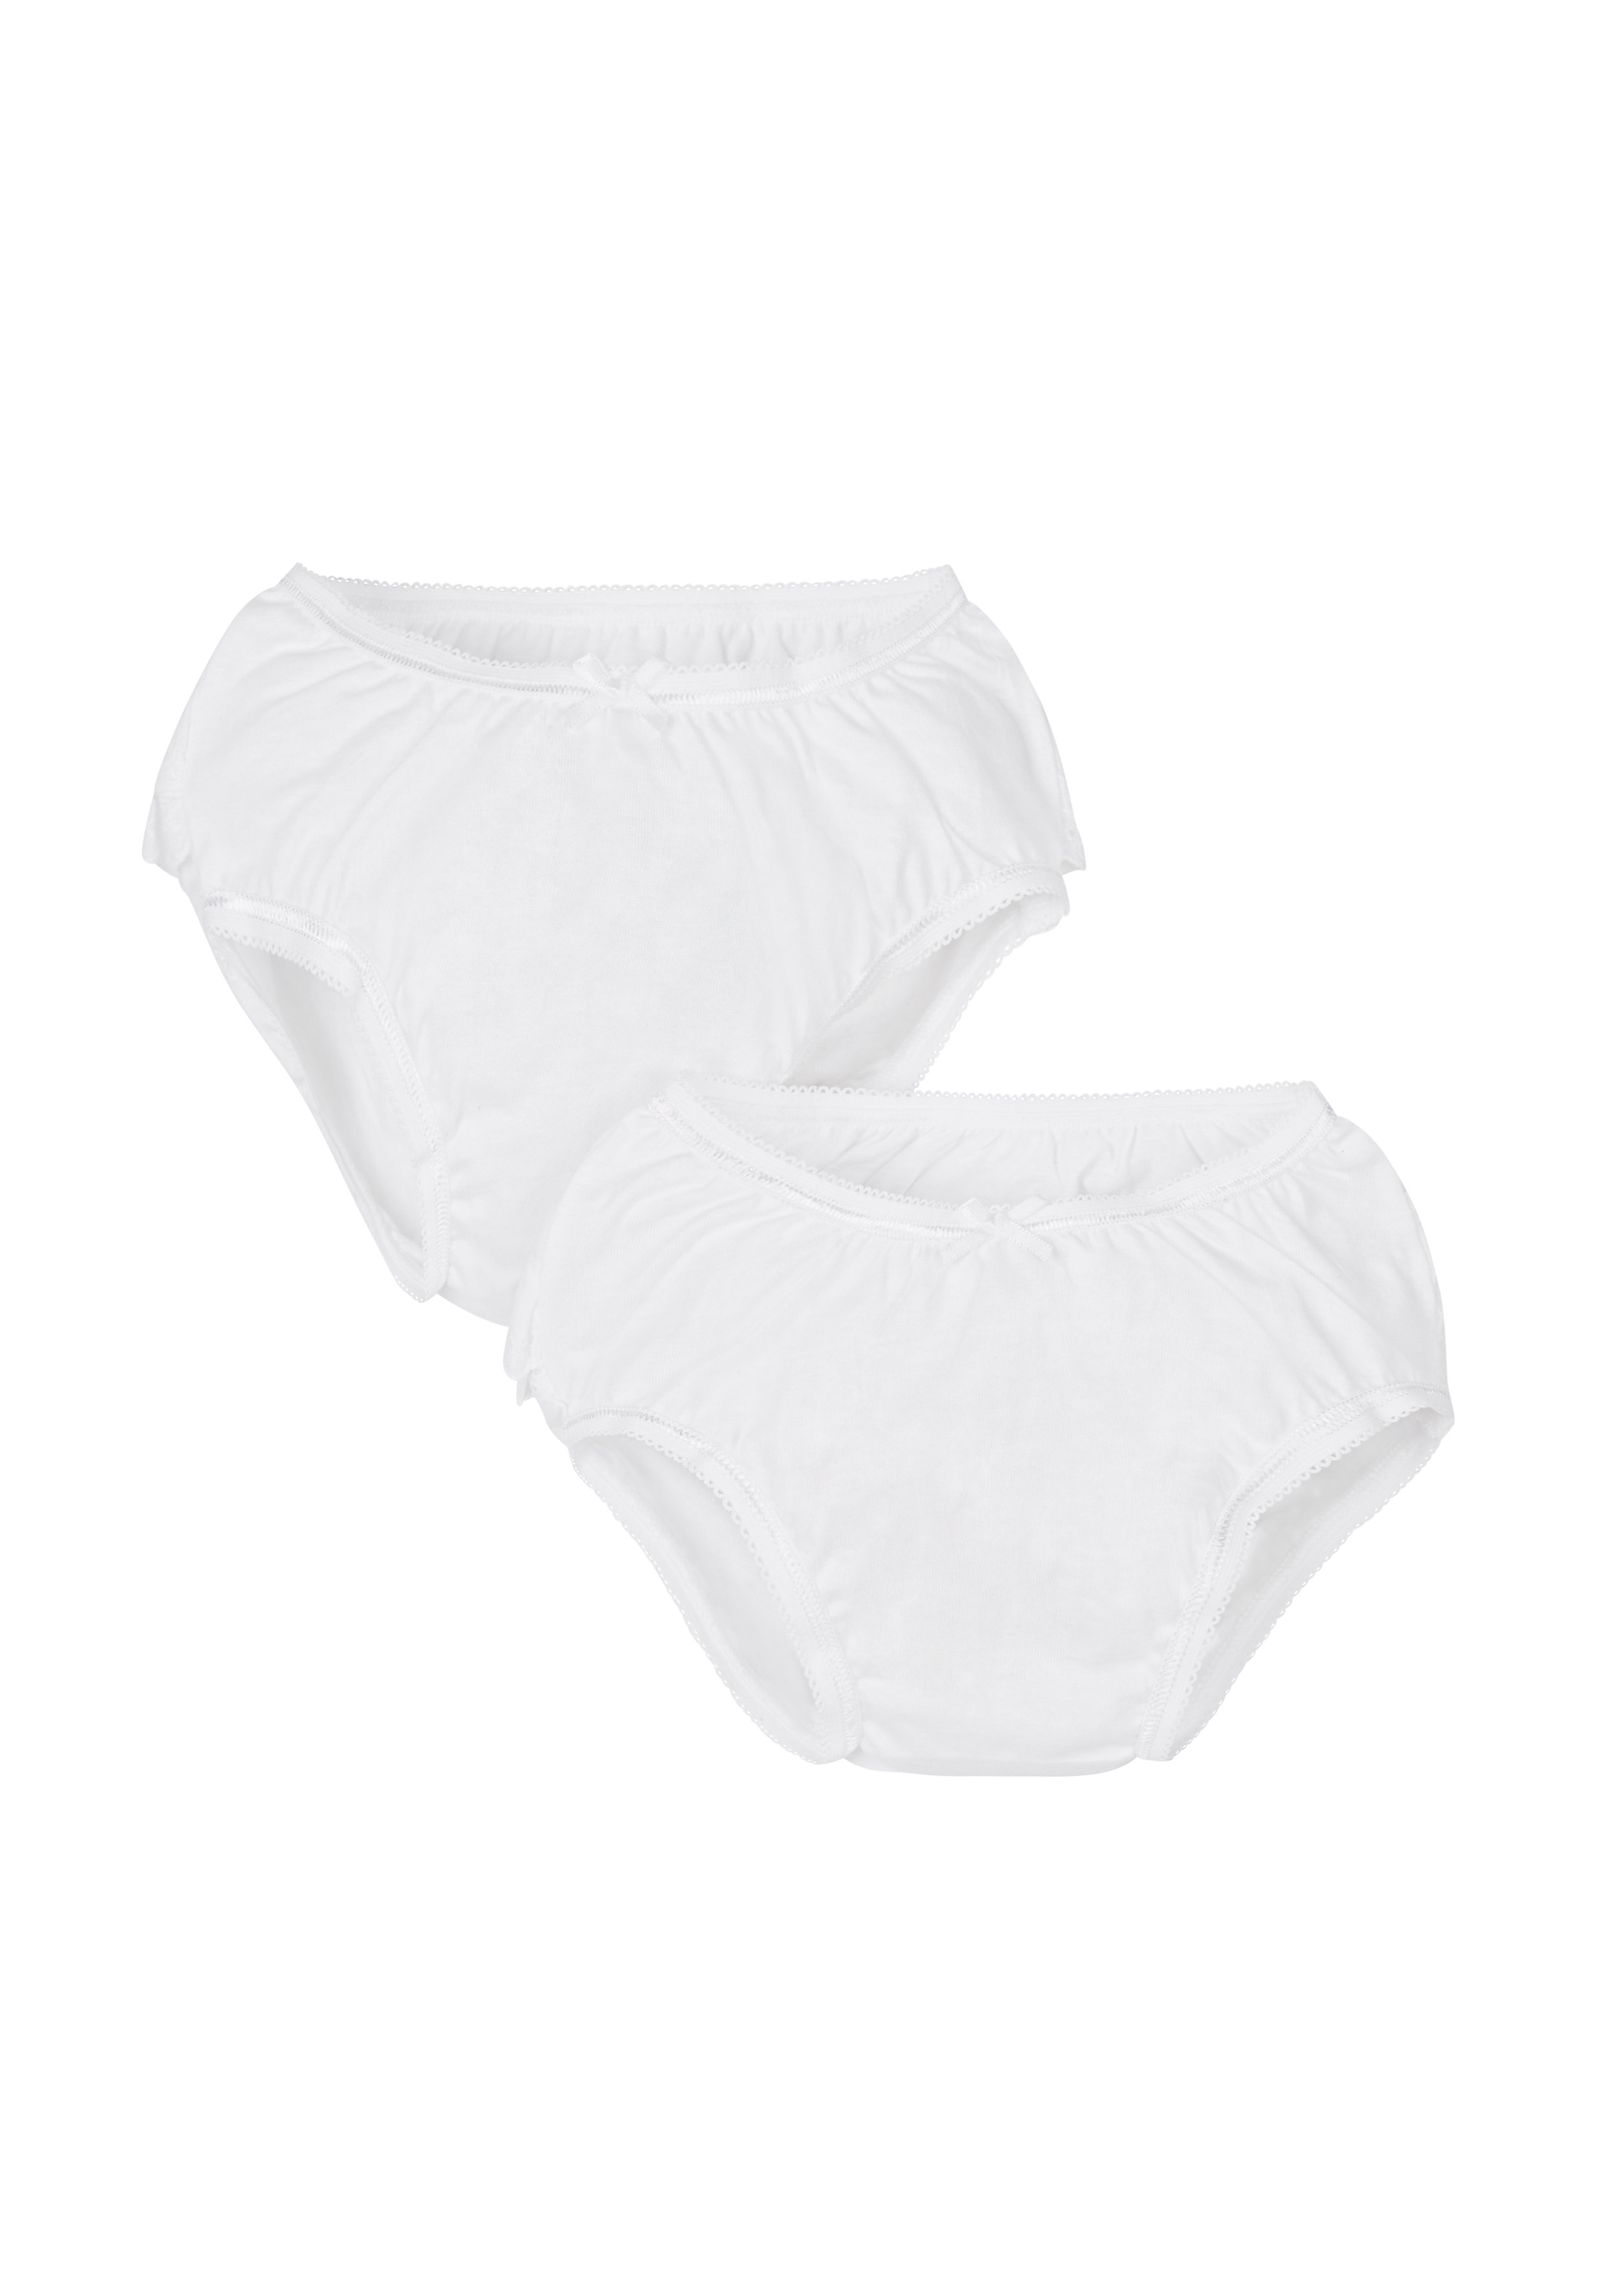 Mothercare | Girls Briefs Frill Detail - Pack Of 2 - White